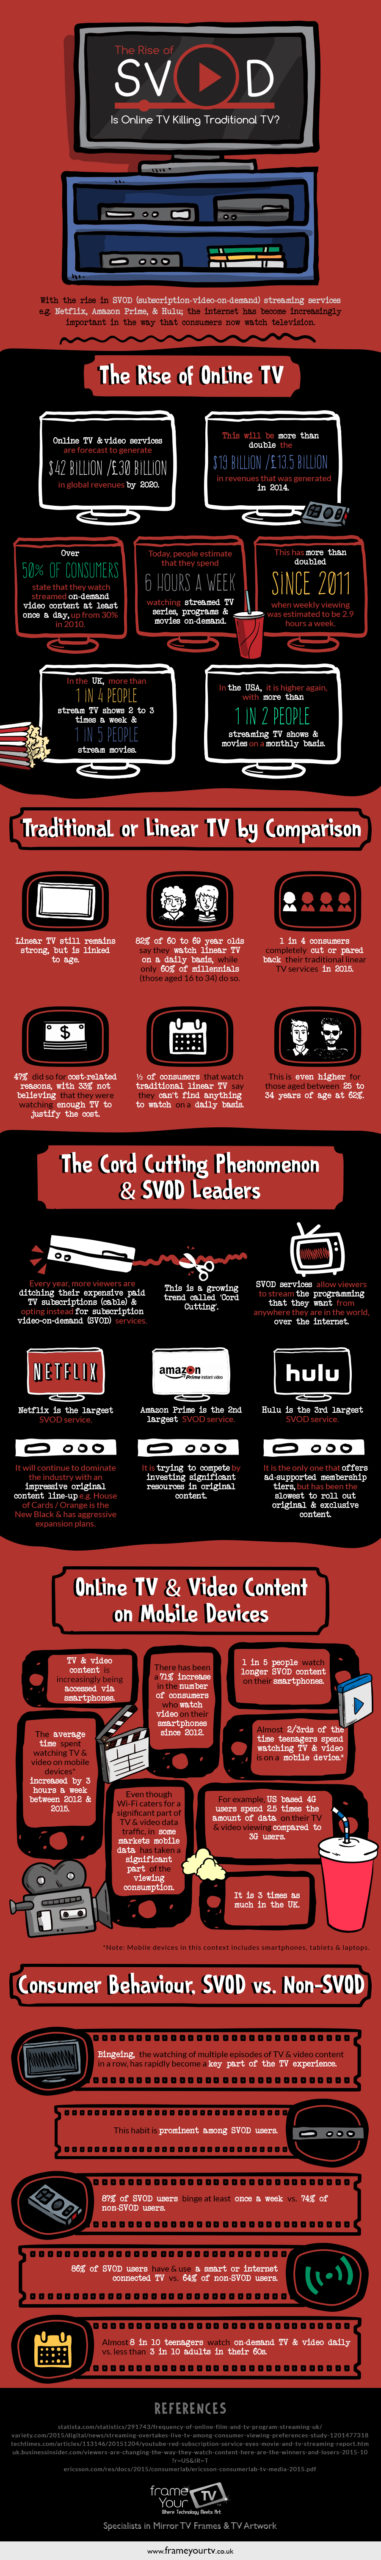 Is Online TV Killing Traditional TV? (Infographic)